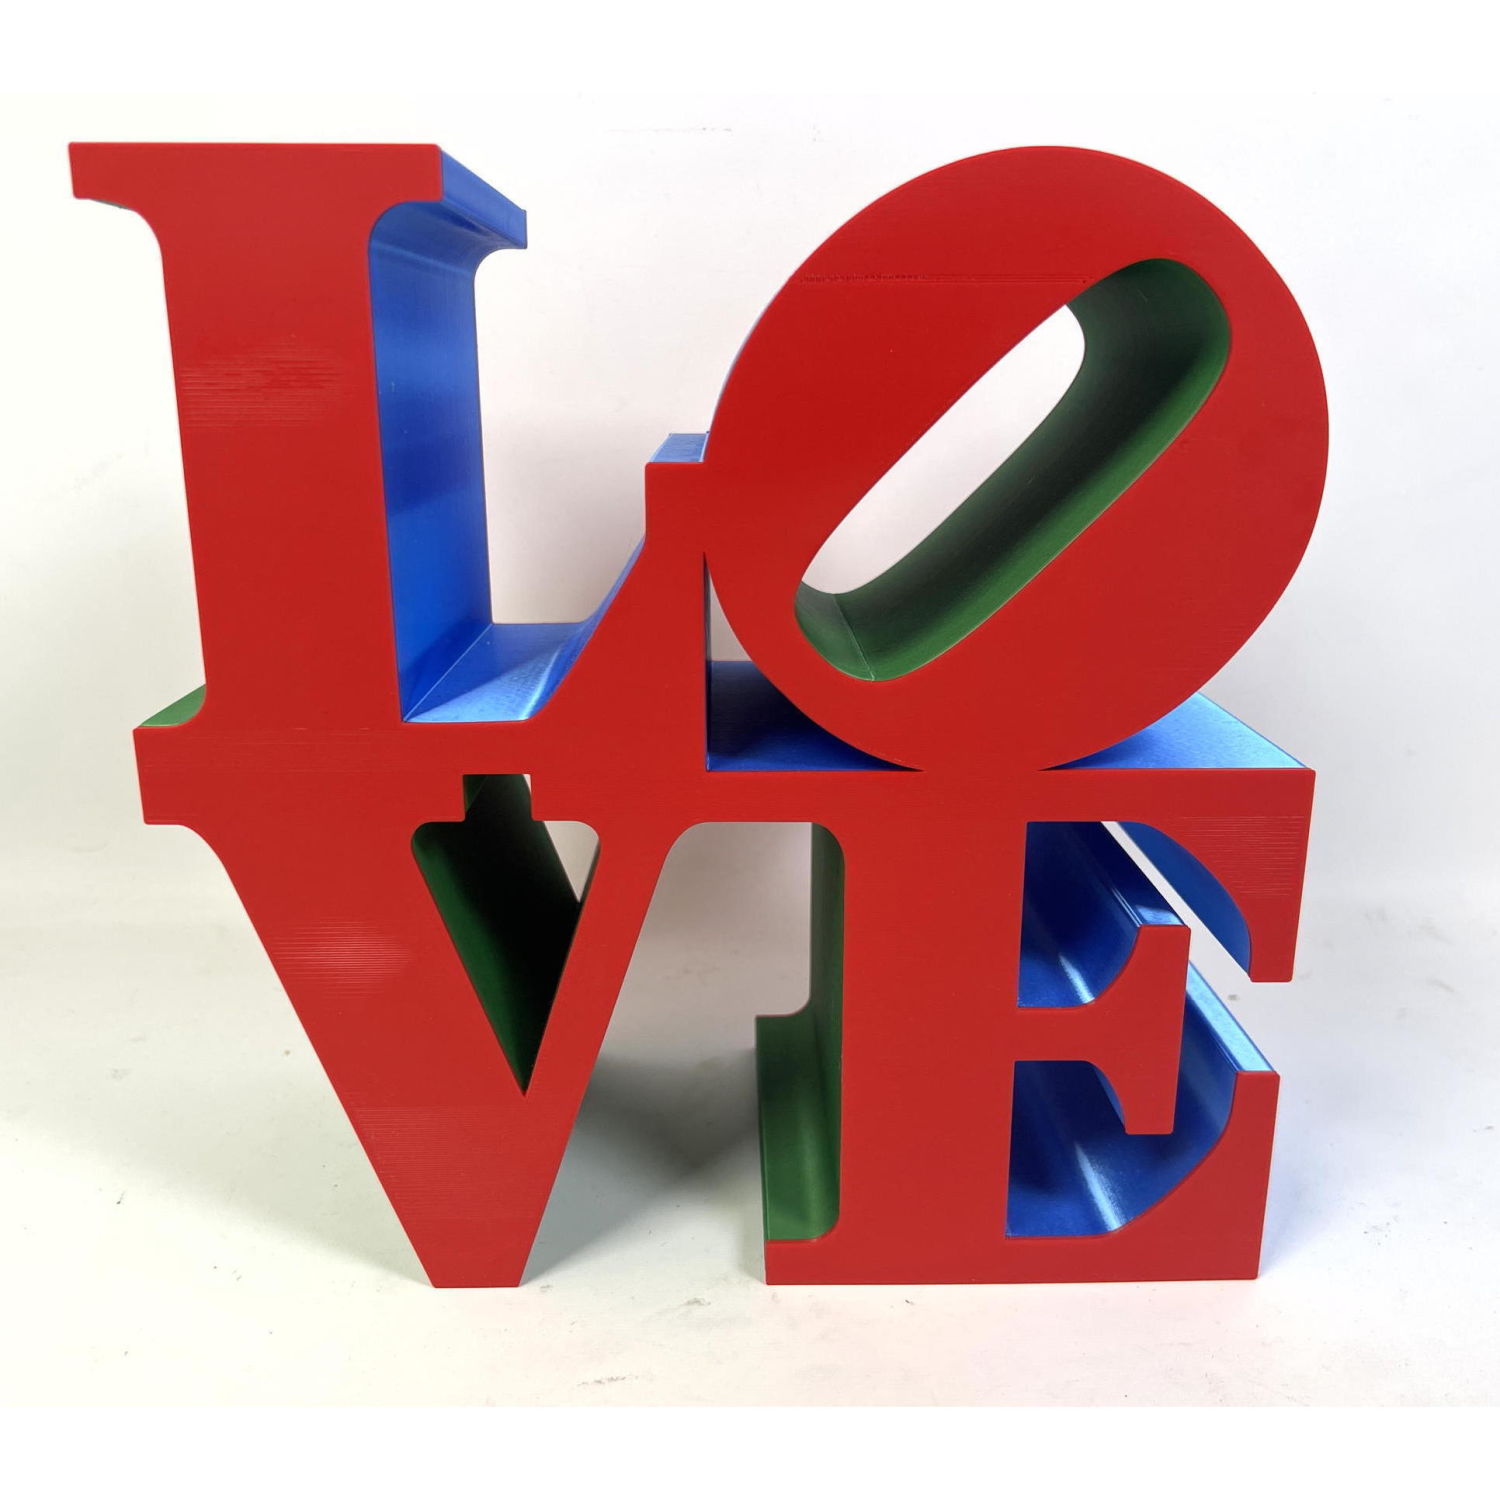 After Robert Indiana "LOVE" Colorful.